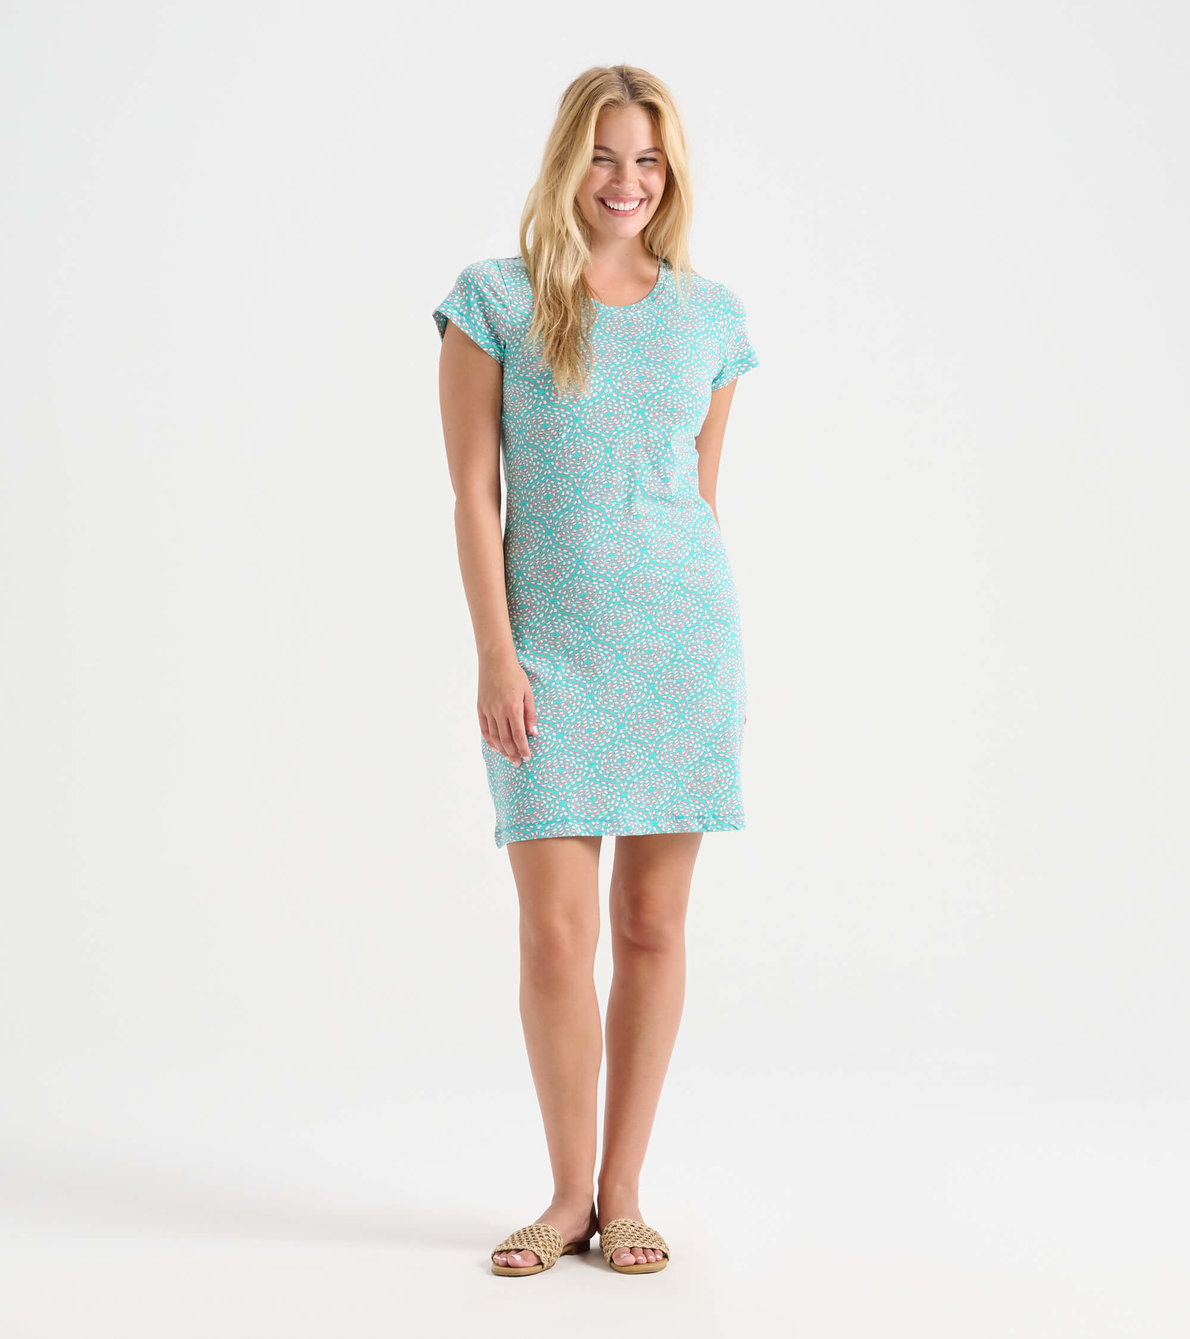 View larger image of Women's Skipped Stones Crew Neck T-Shirt Dress